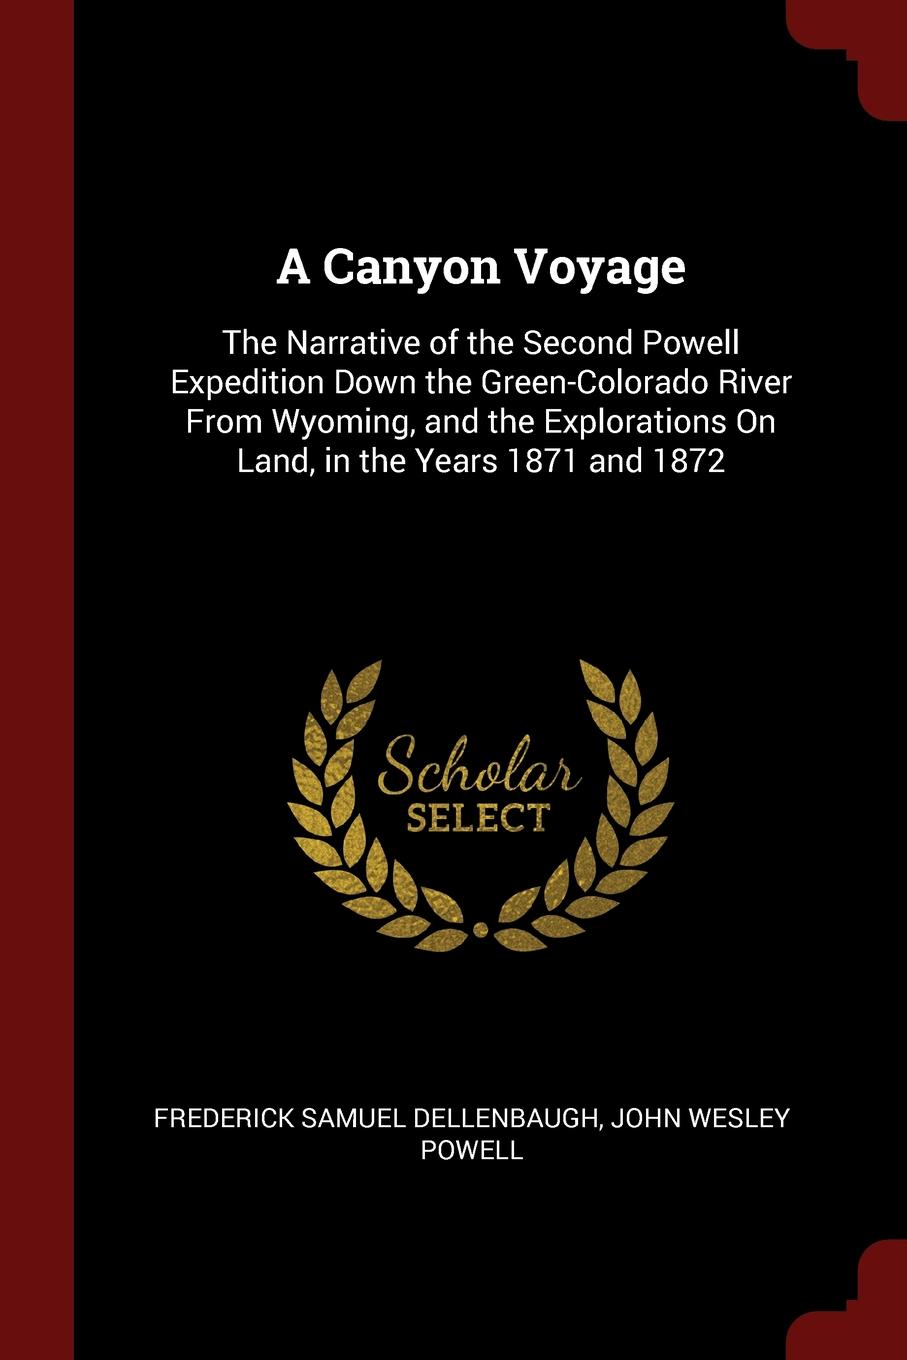 A Canyon Voyage. The Narrative of the Second Powell Expedition Down the Green-Colorado River From Wyoming, and the Explorations On Land, in the Years 1871 and 1872